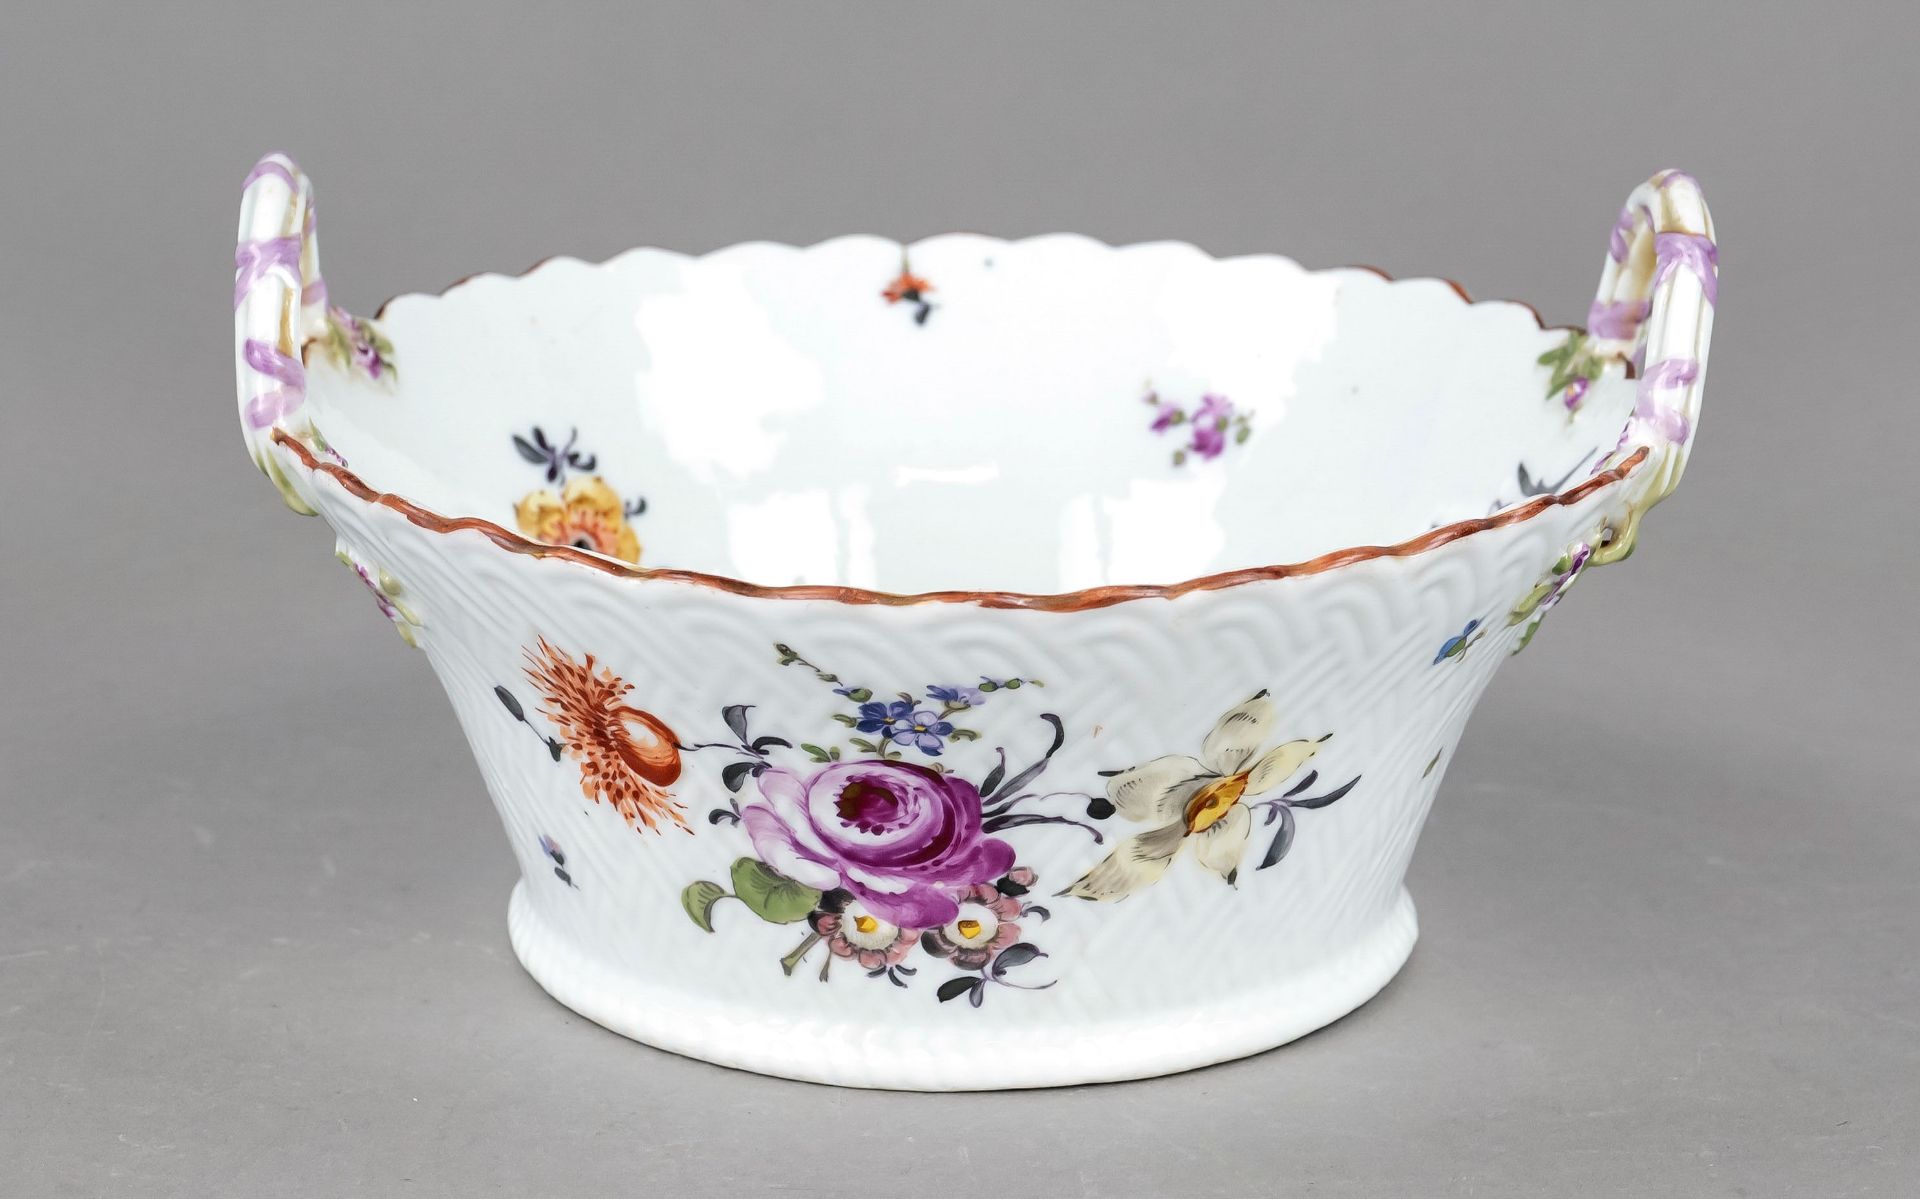 Basket, Meissen, Marcolini mark 1774-1817, 2nd choice, model no. H 48, relief wall with side